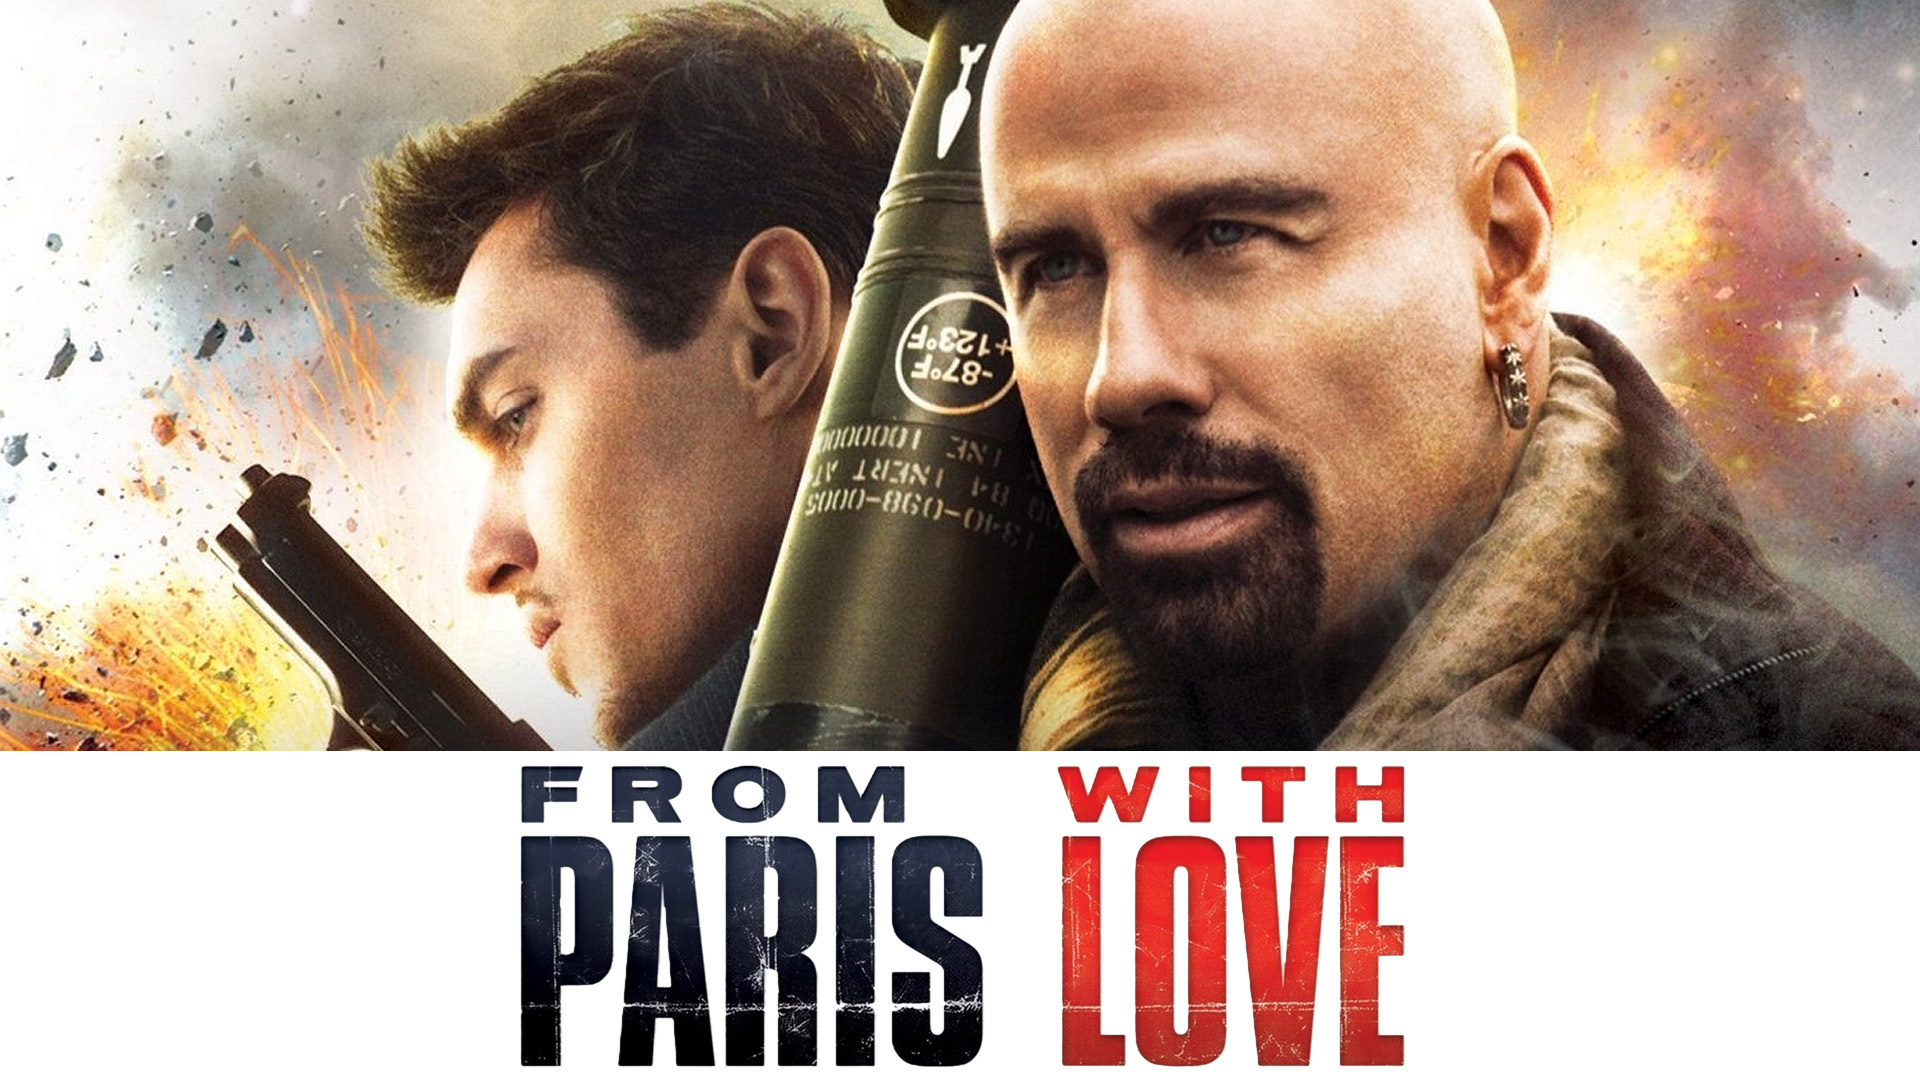 From Paris with Love, 2010 release, Crime thriller, Radio Times, 1920x1080 Full HD Desktop